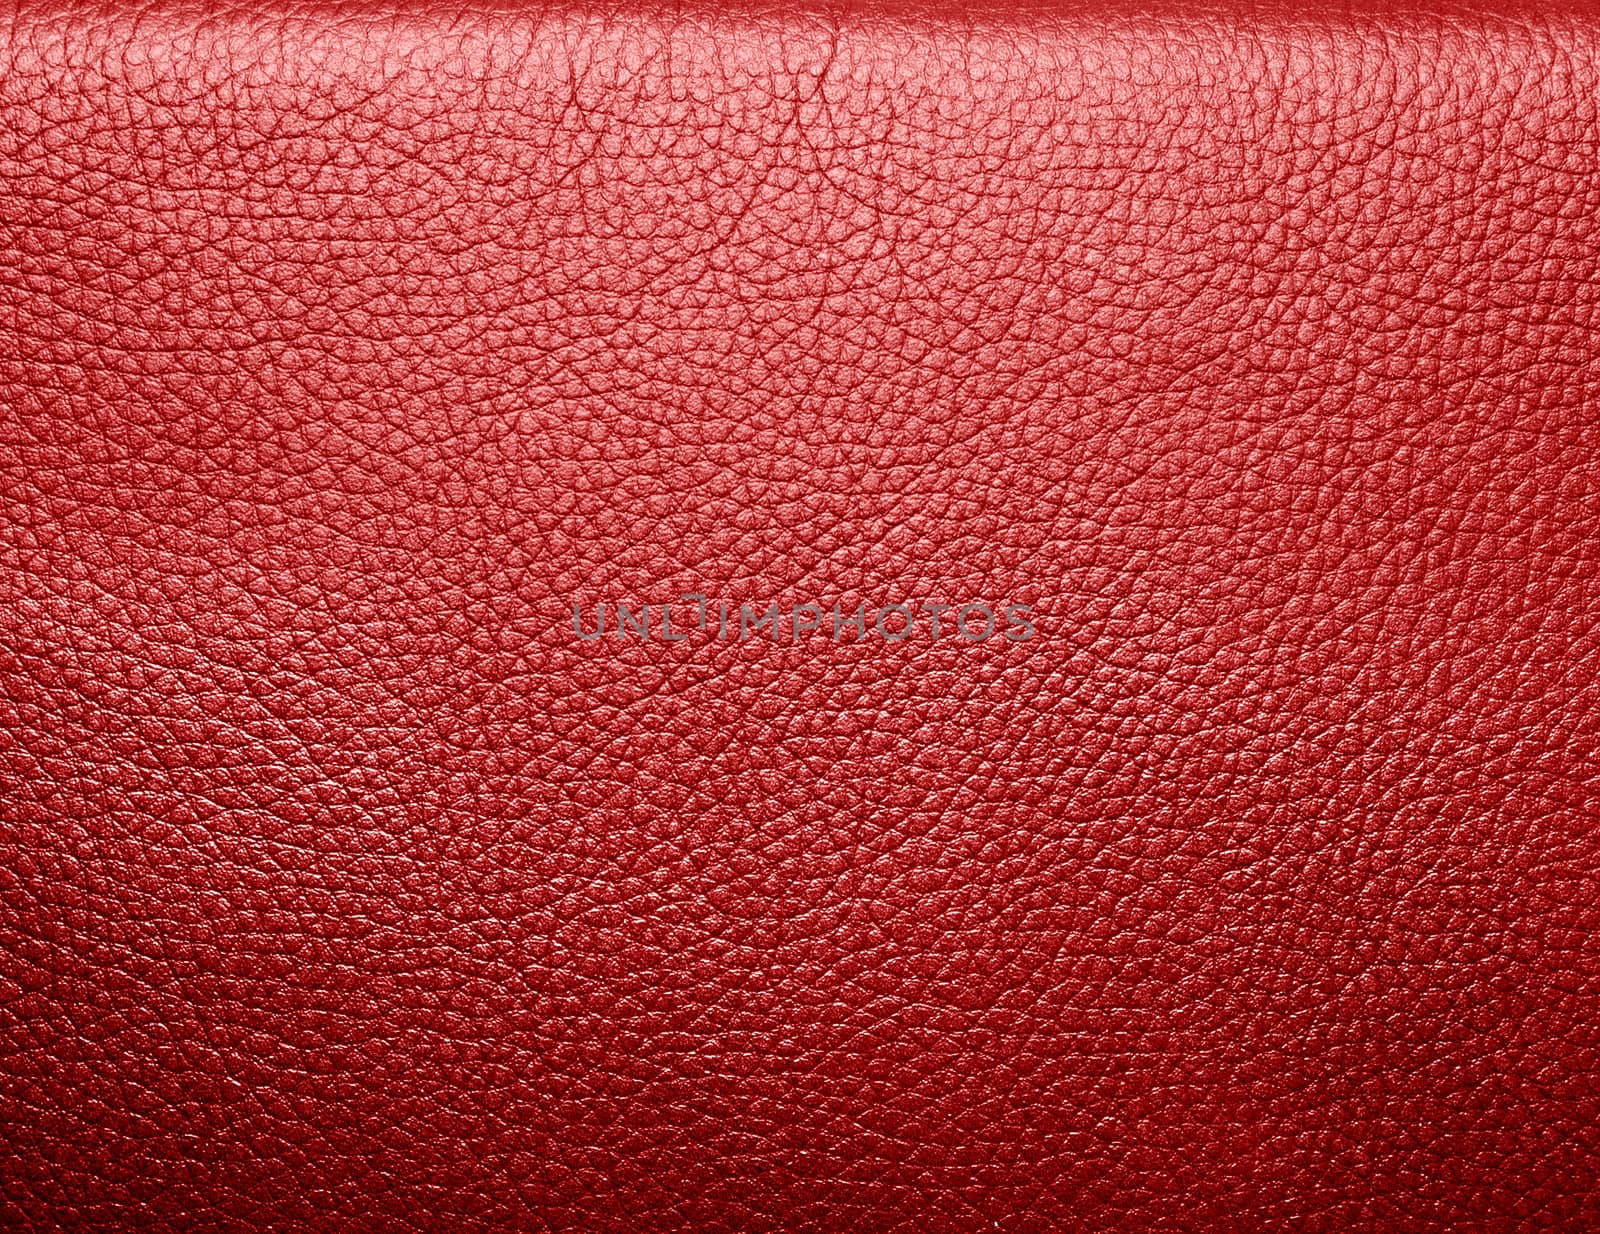 Soft wrinkled red leather. Texture or background with copyspace, high resolution